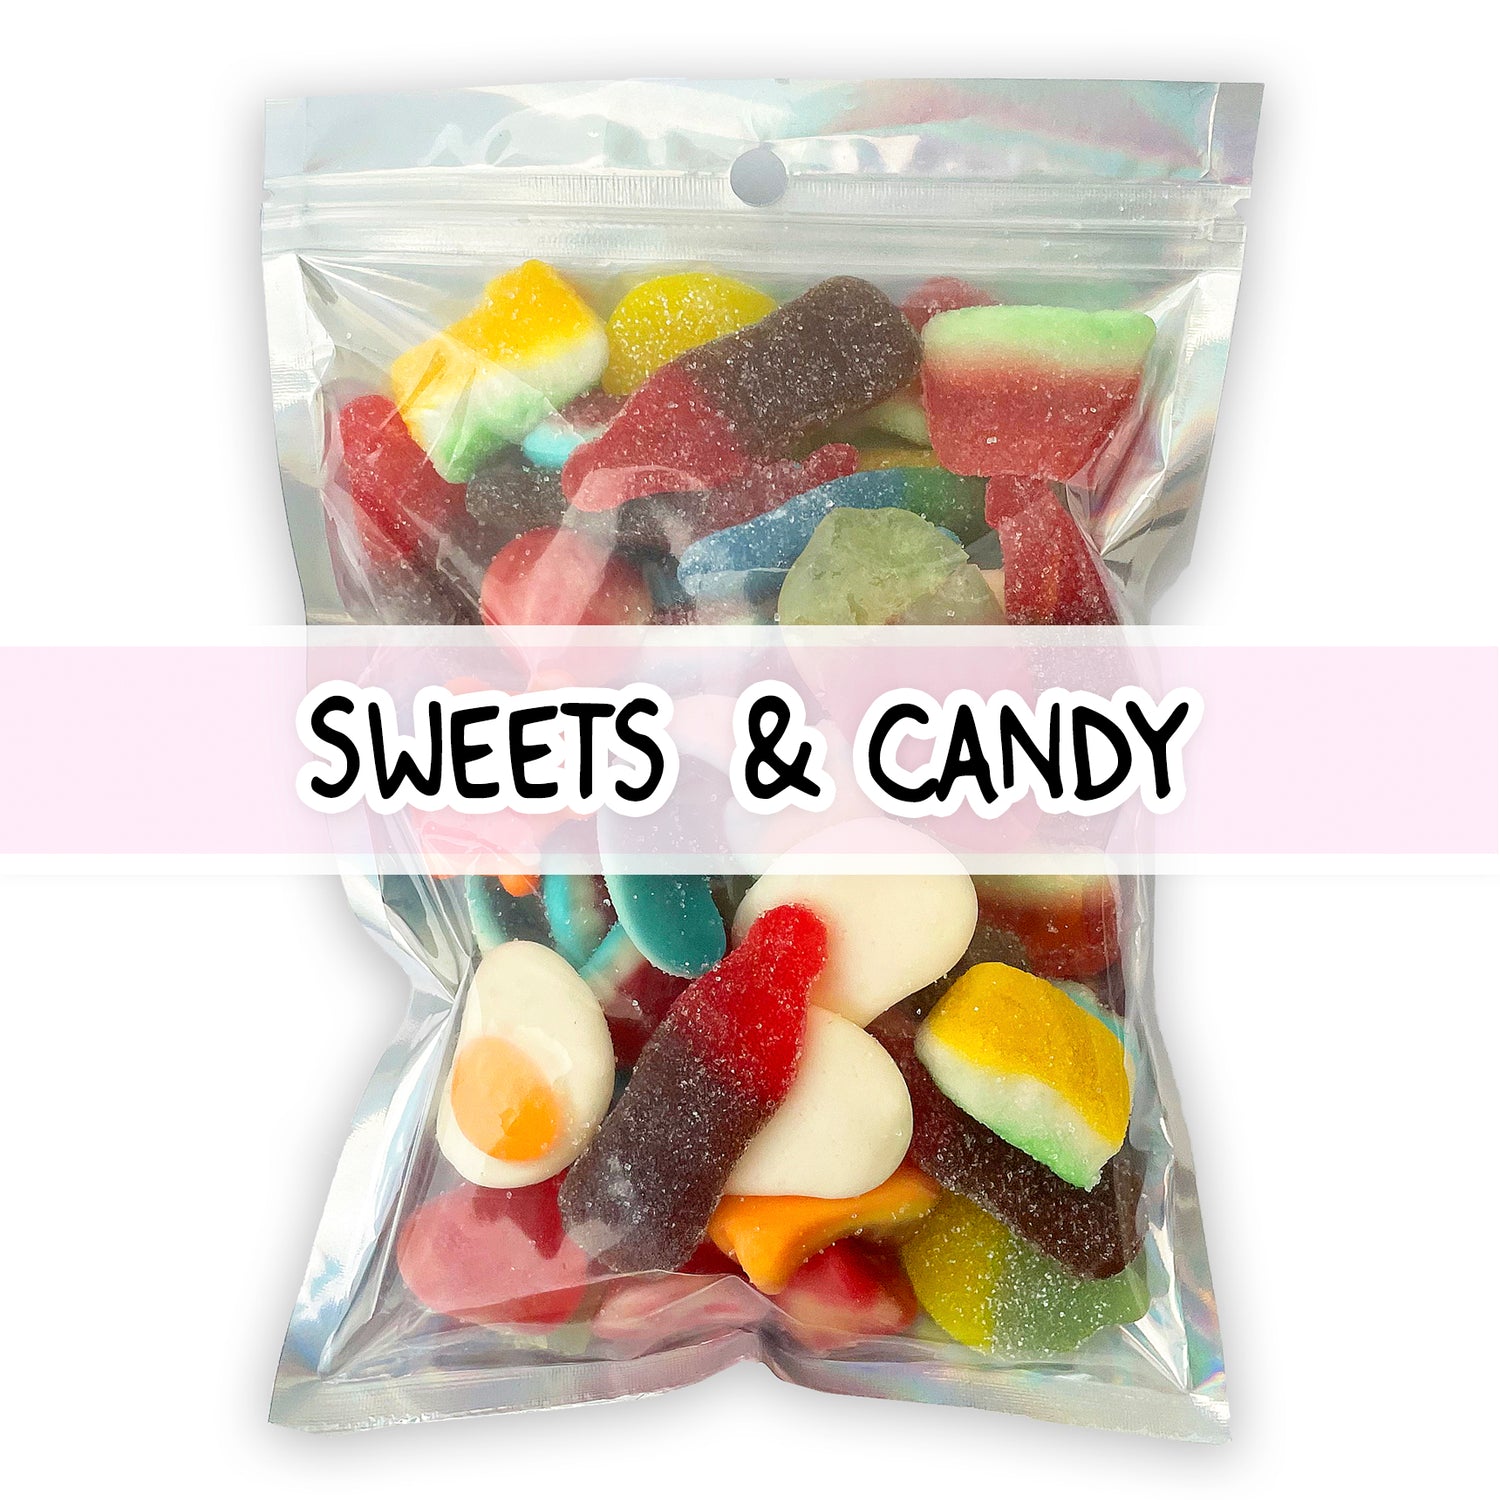 Sweets & Candy